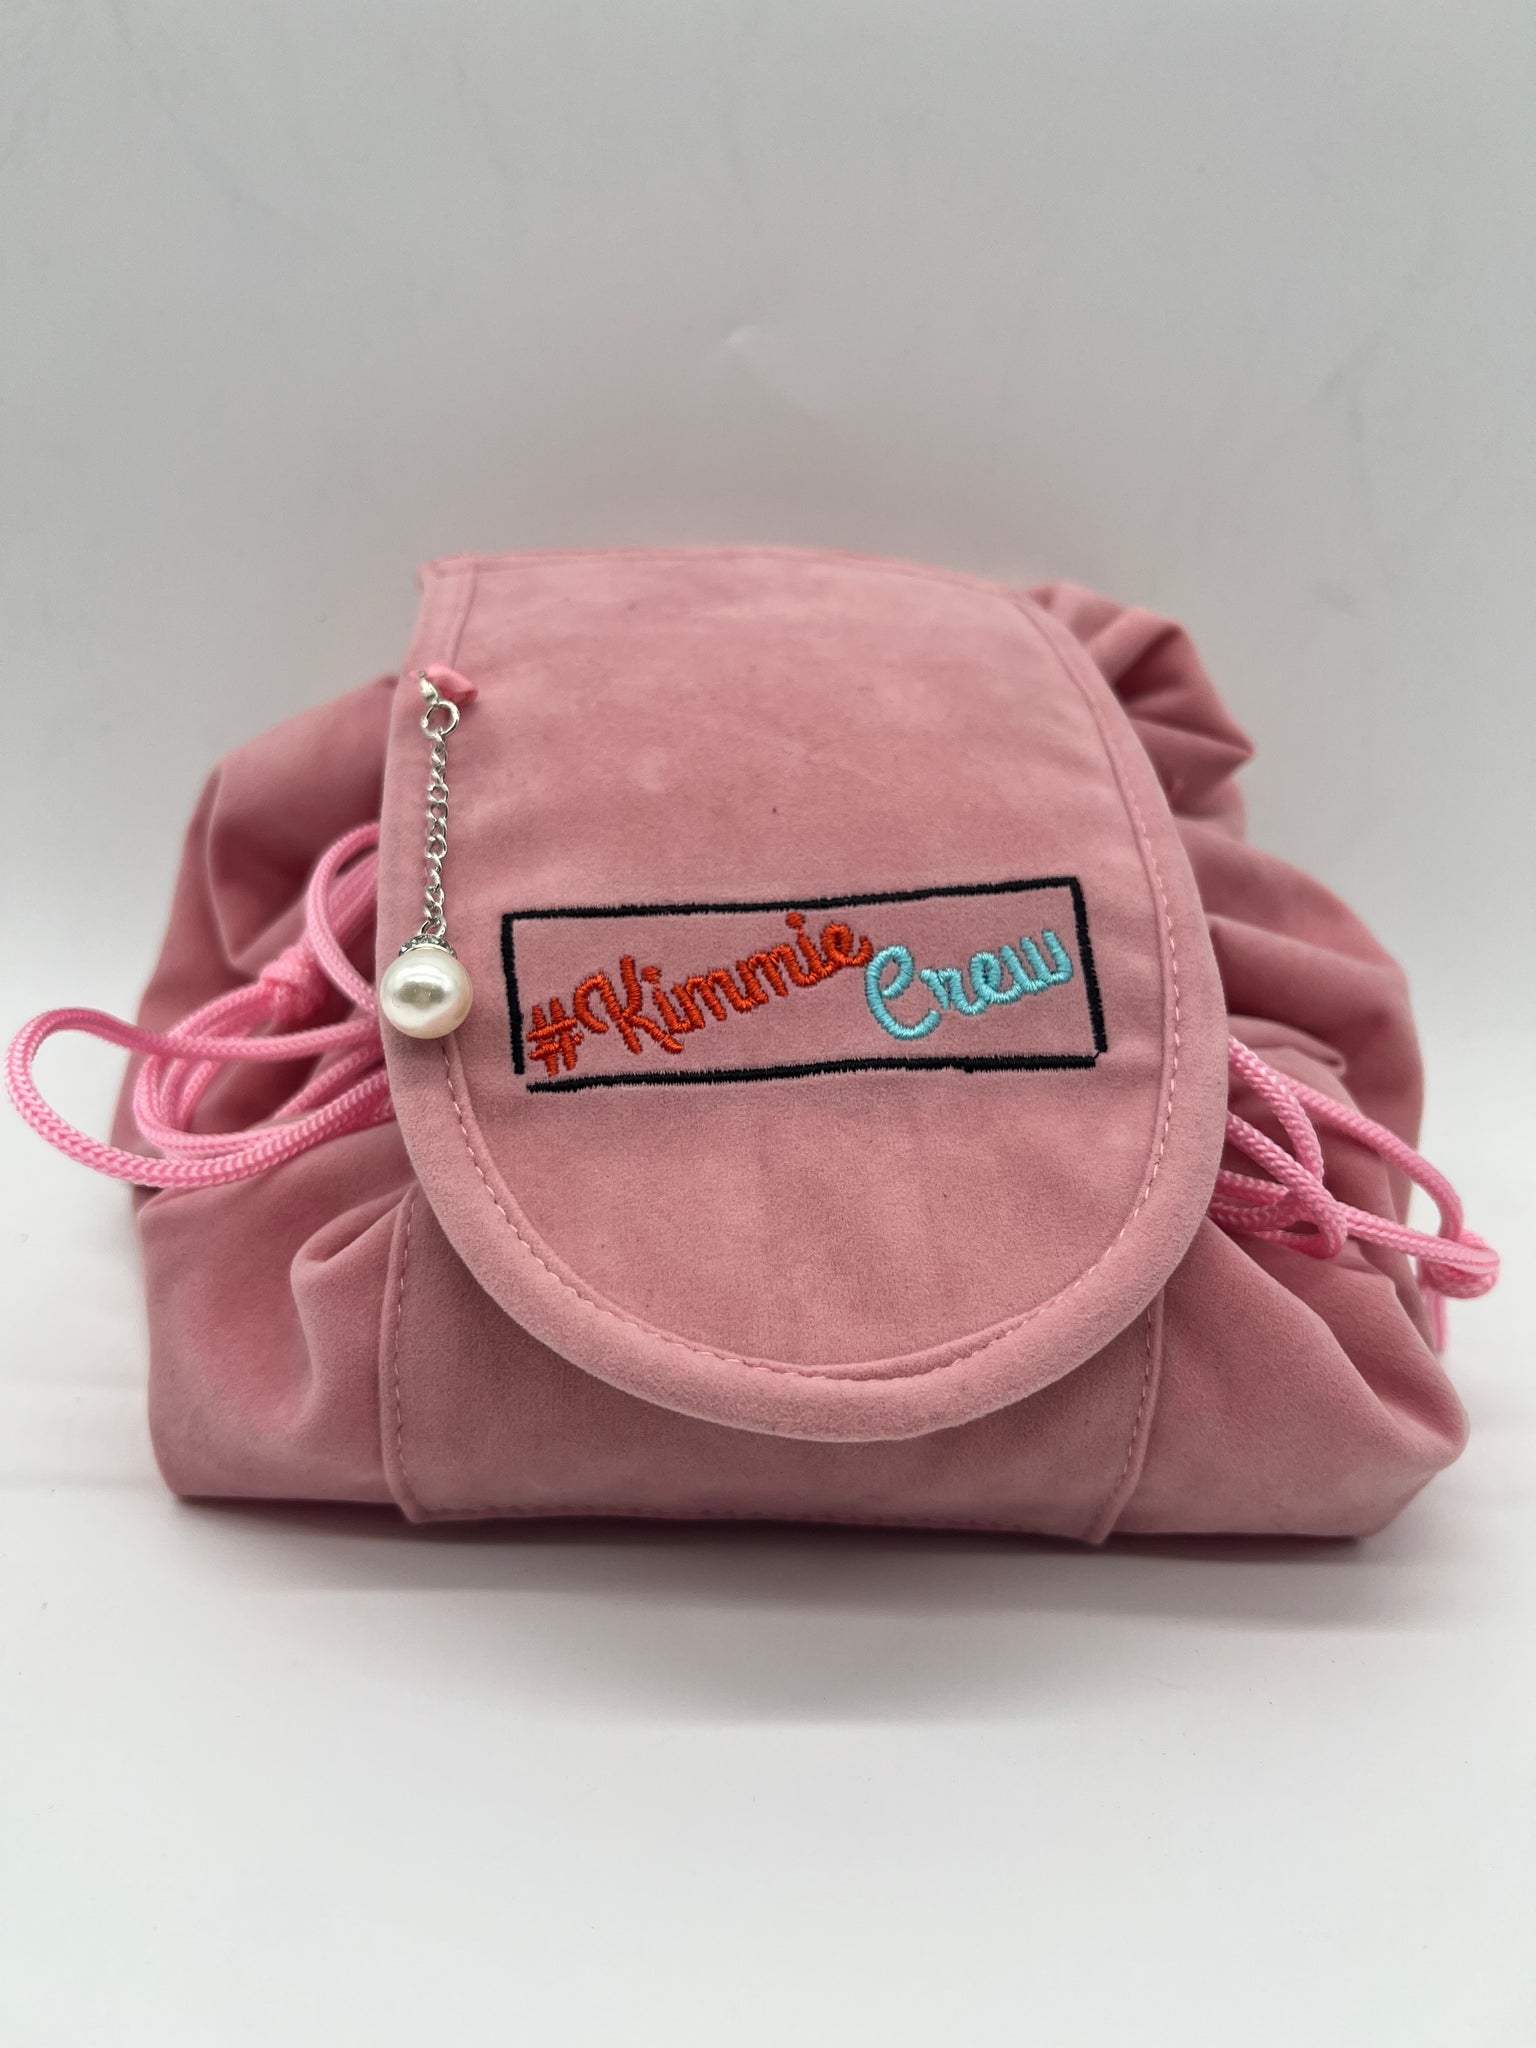 NEW Kimmiebbags Velvet Pink Cosmetic Toiletry Travel Bag SALE -$8 Off 080523